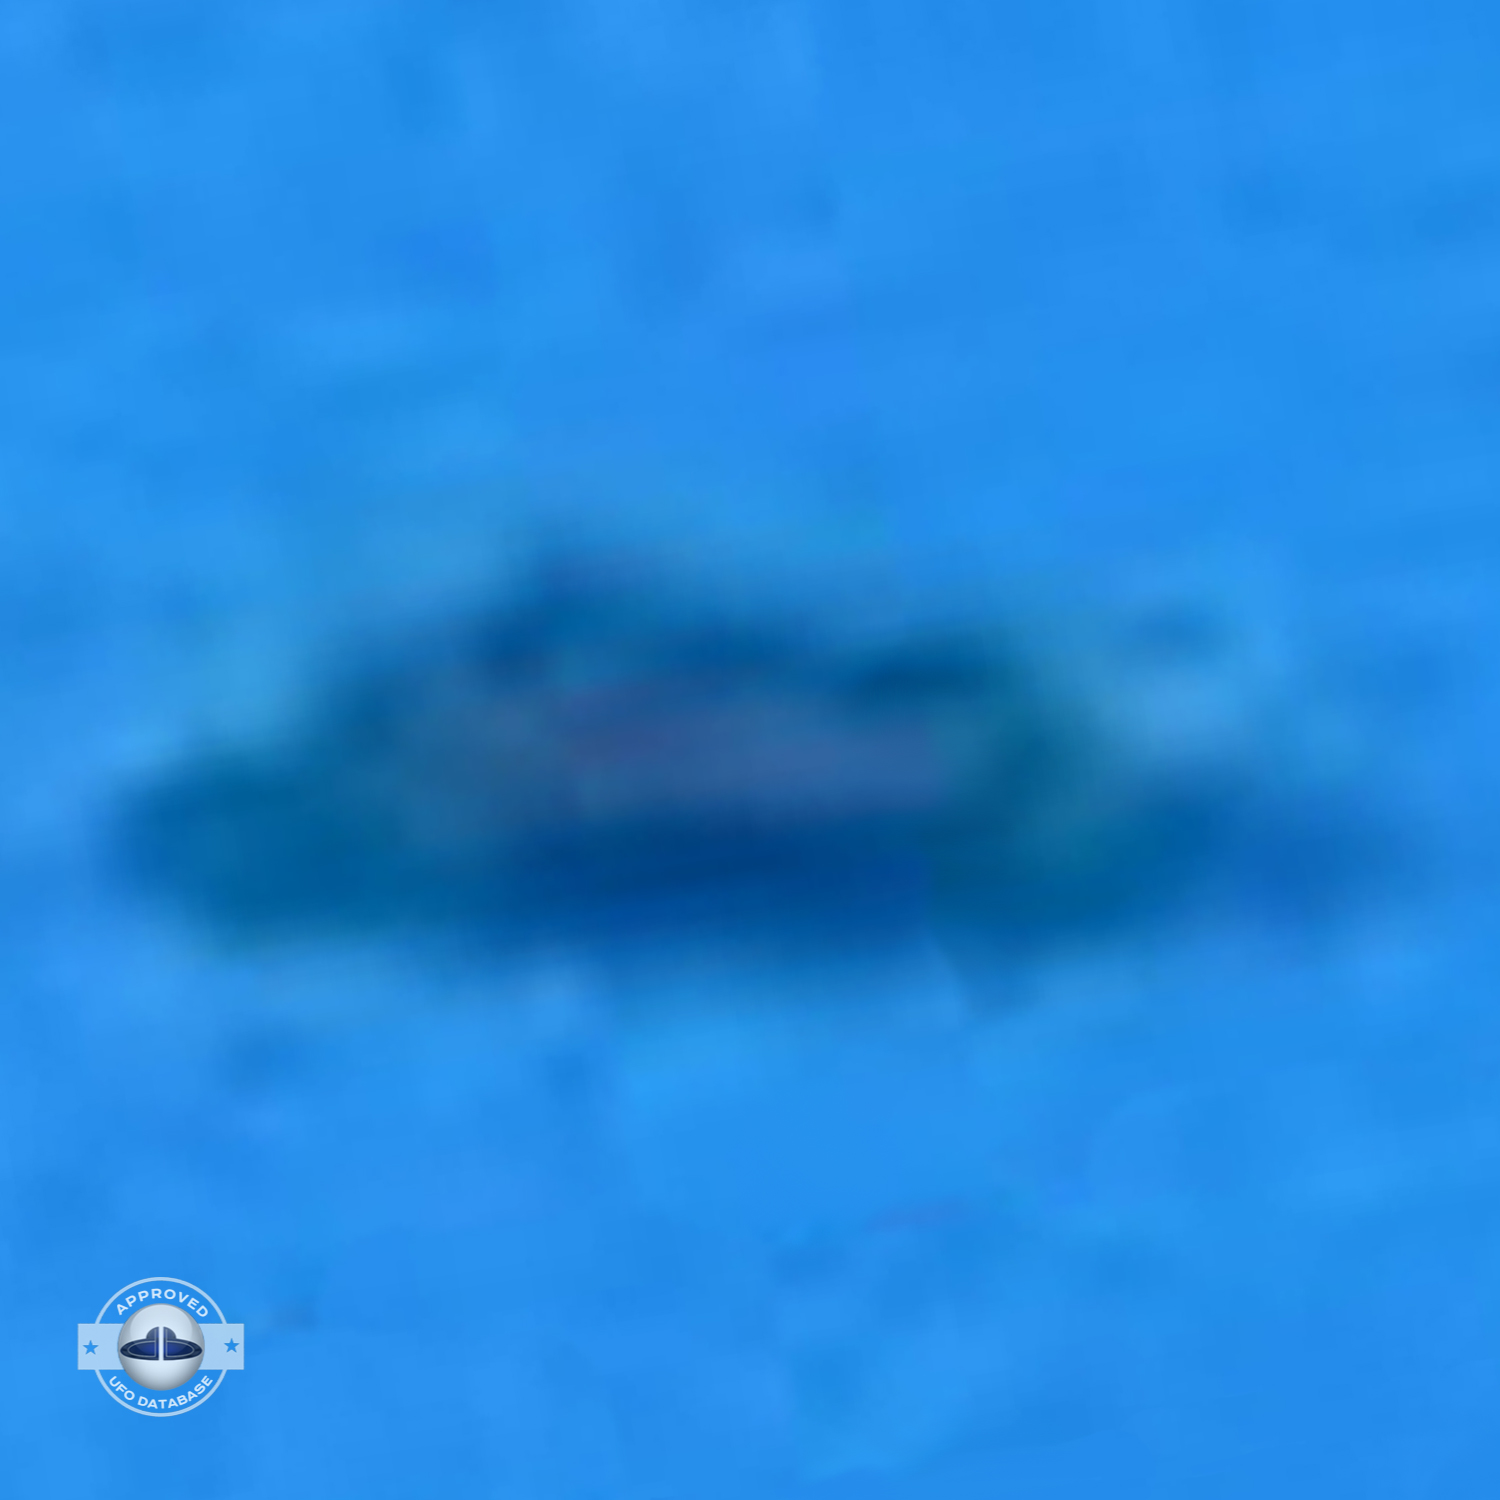 Picture of UFO near airplane over Vnukovo Airport | Moscow, Russia UFO Picture #179-7